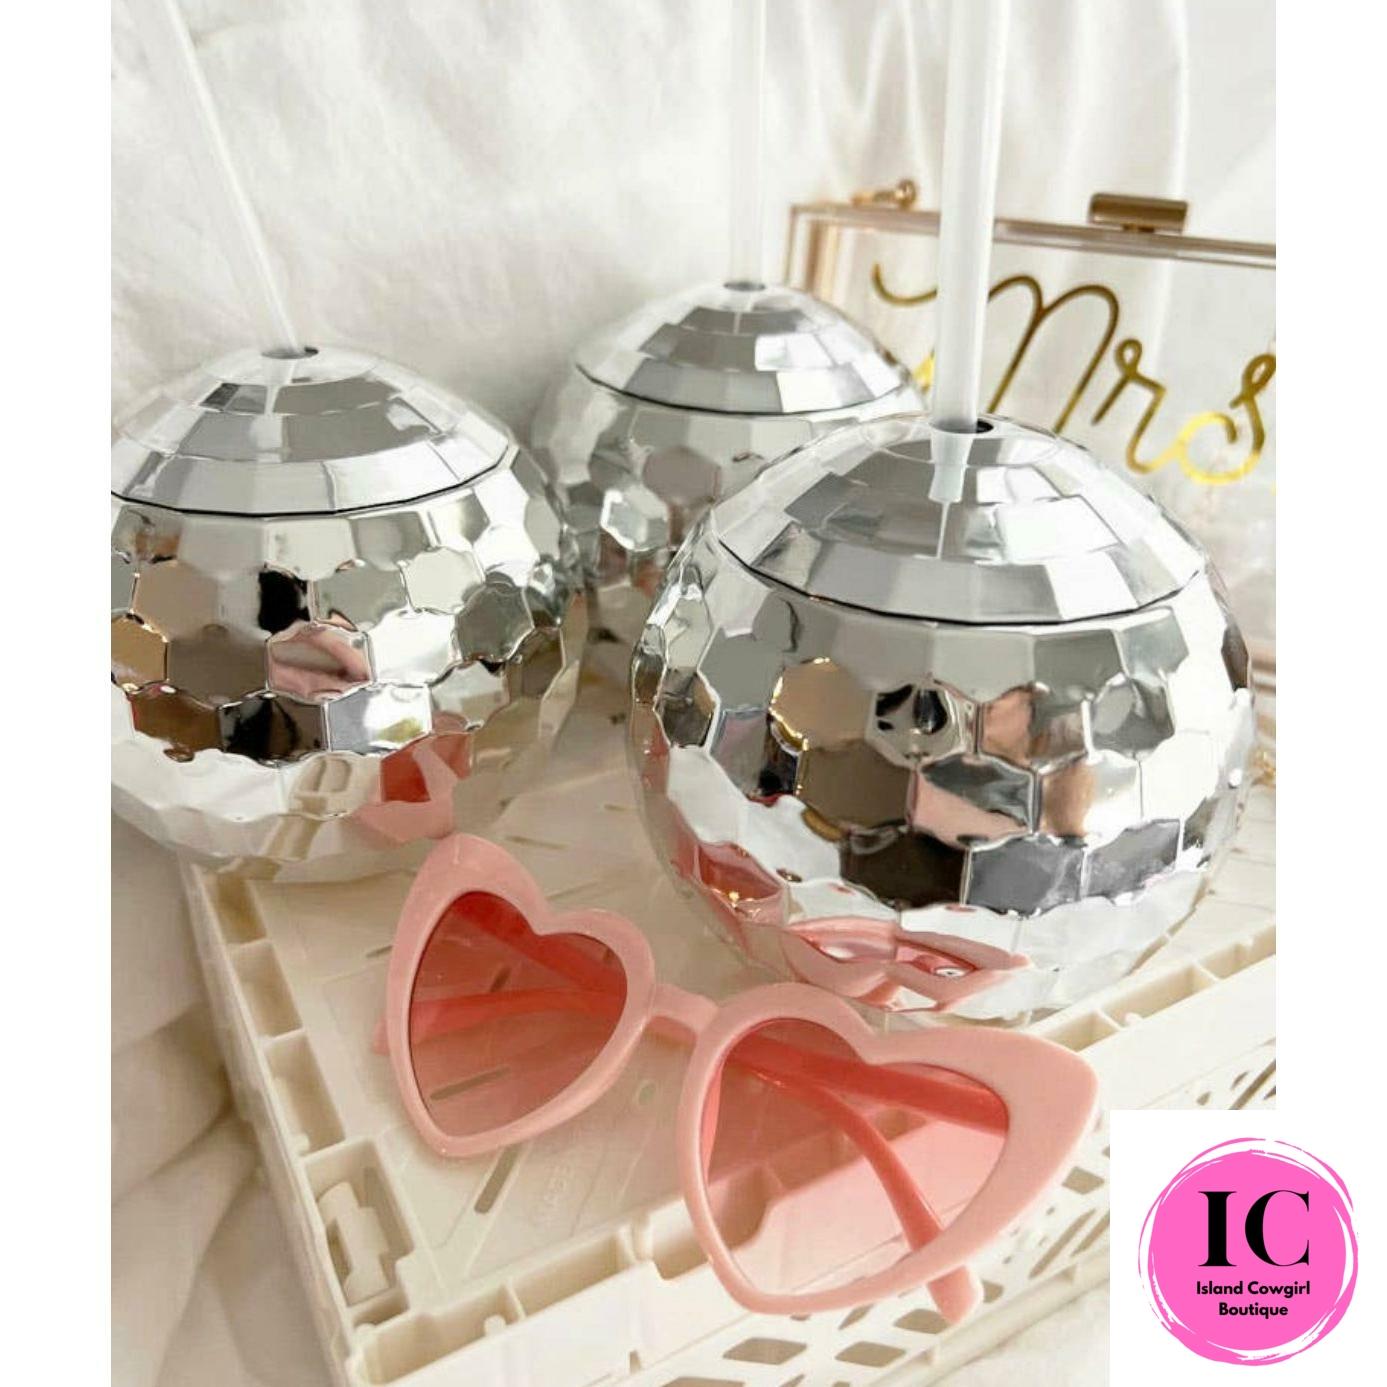 Disco Ball Cup - Island Cowgirl Boutique